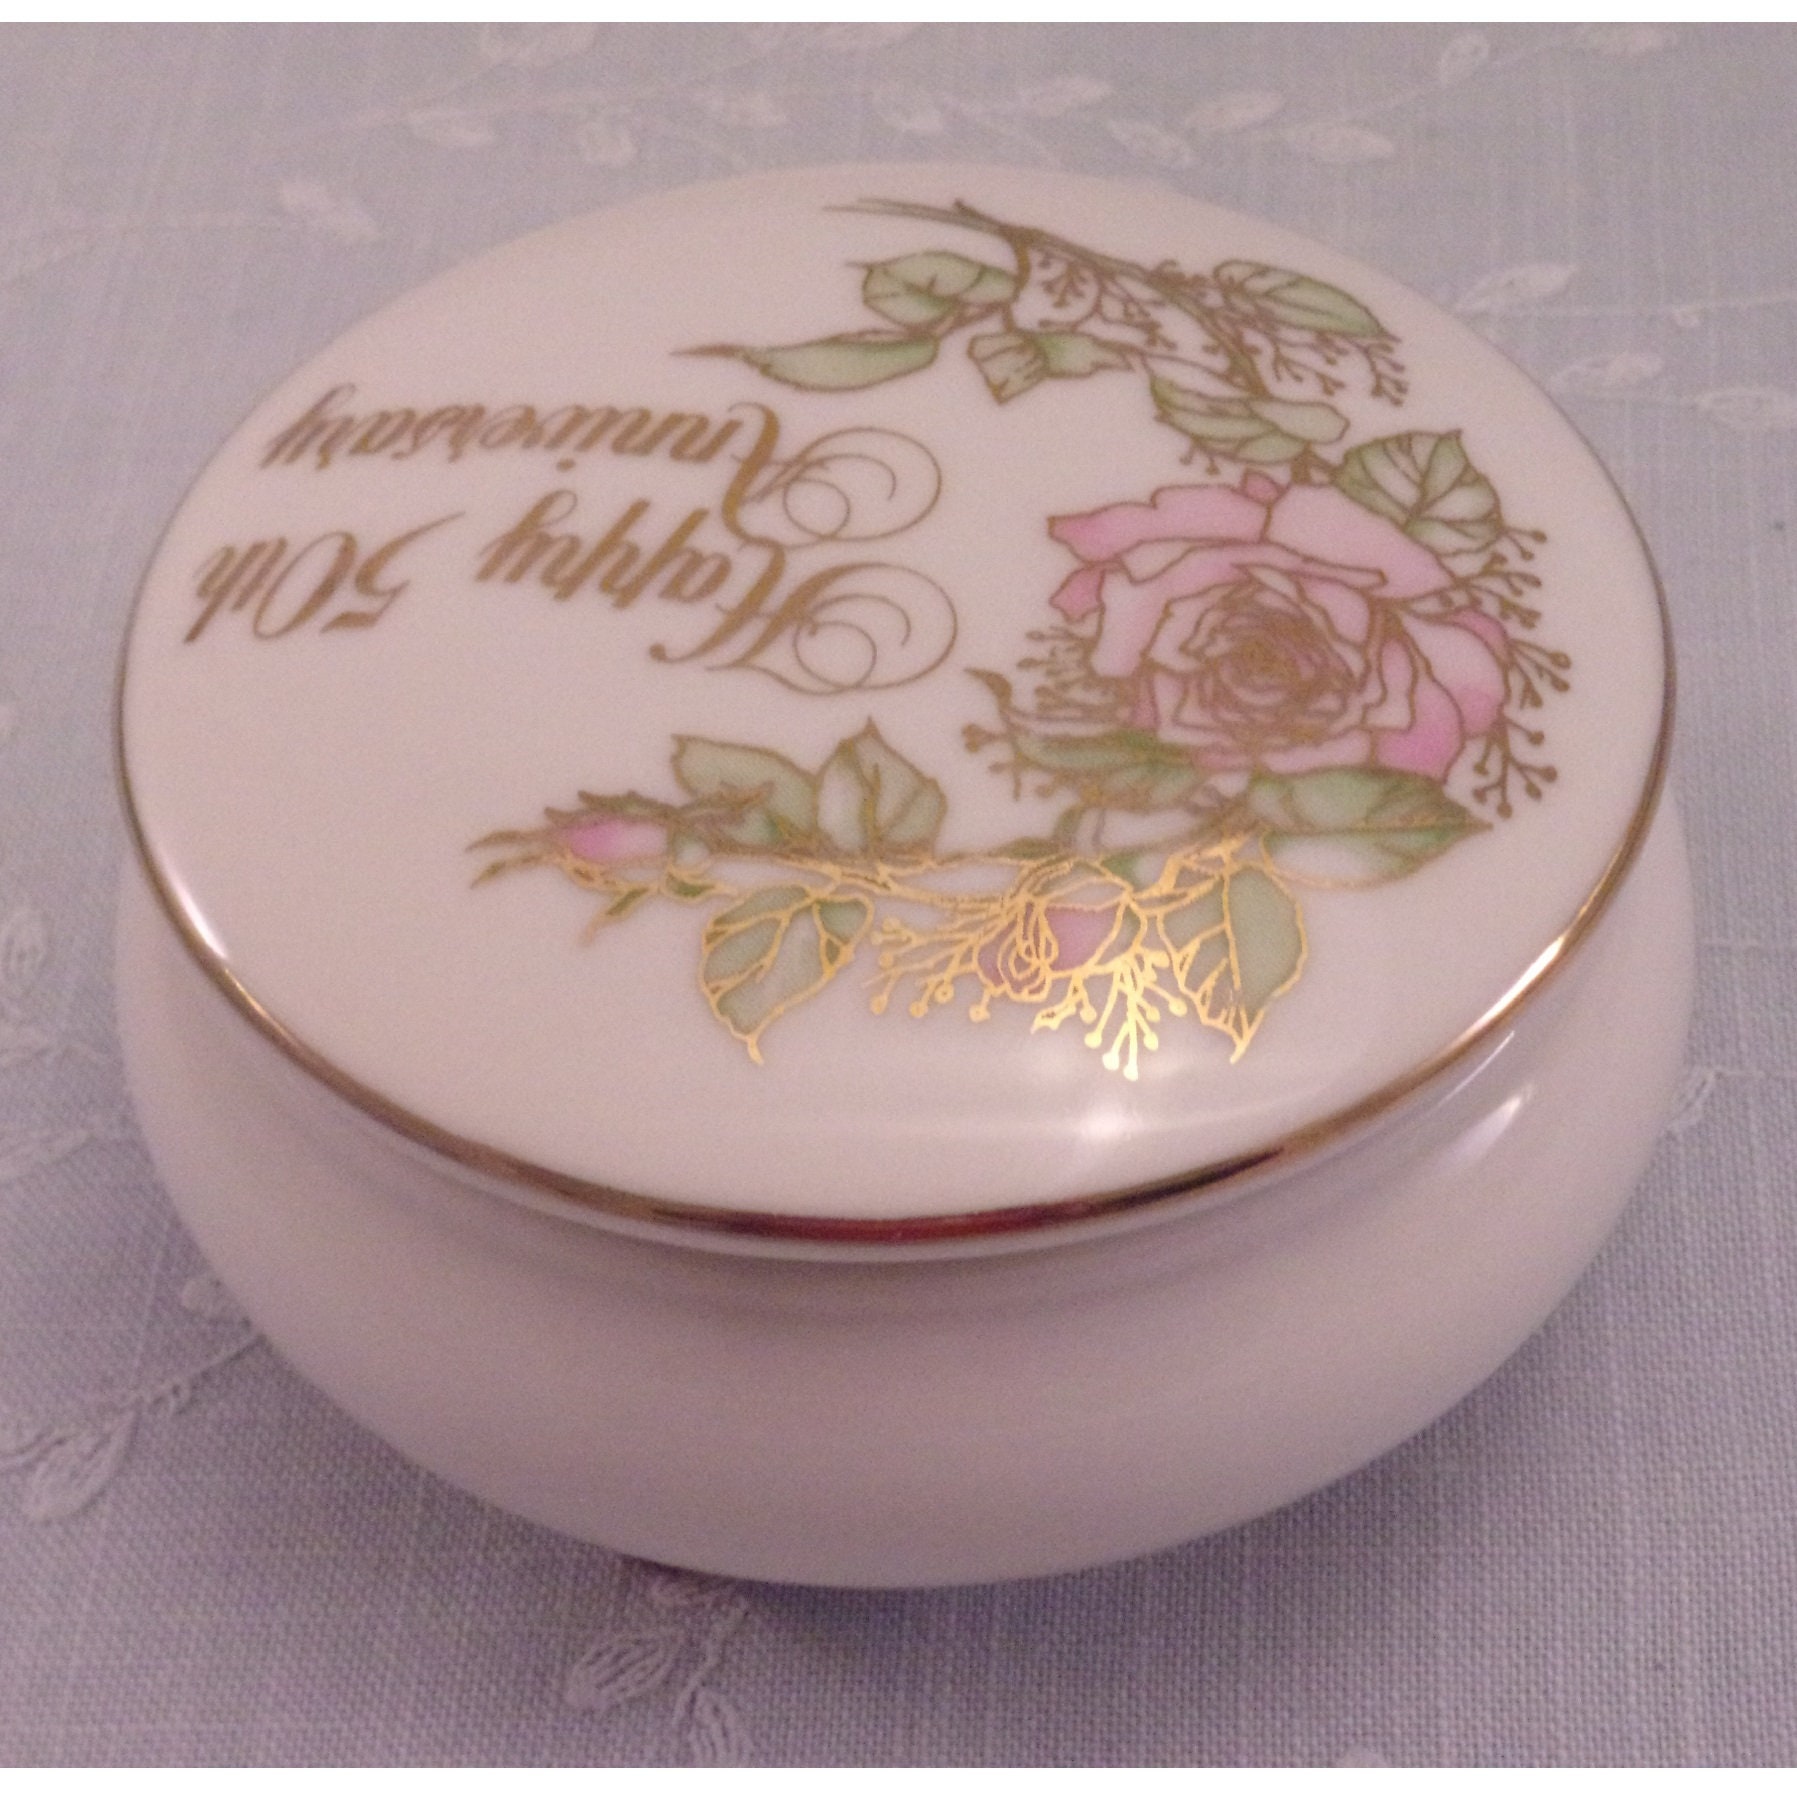 50th Wedding Anniversary Small Footed Vintage Trinket Box to ...